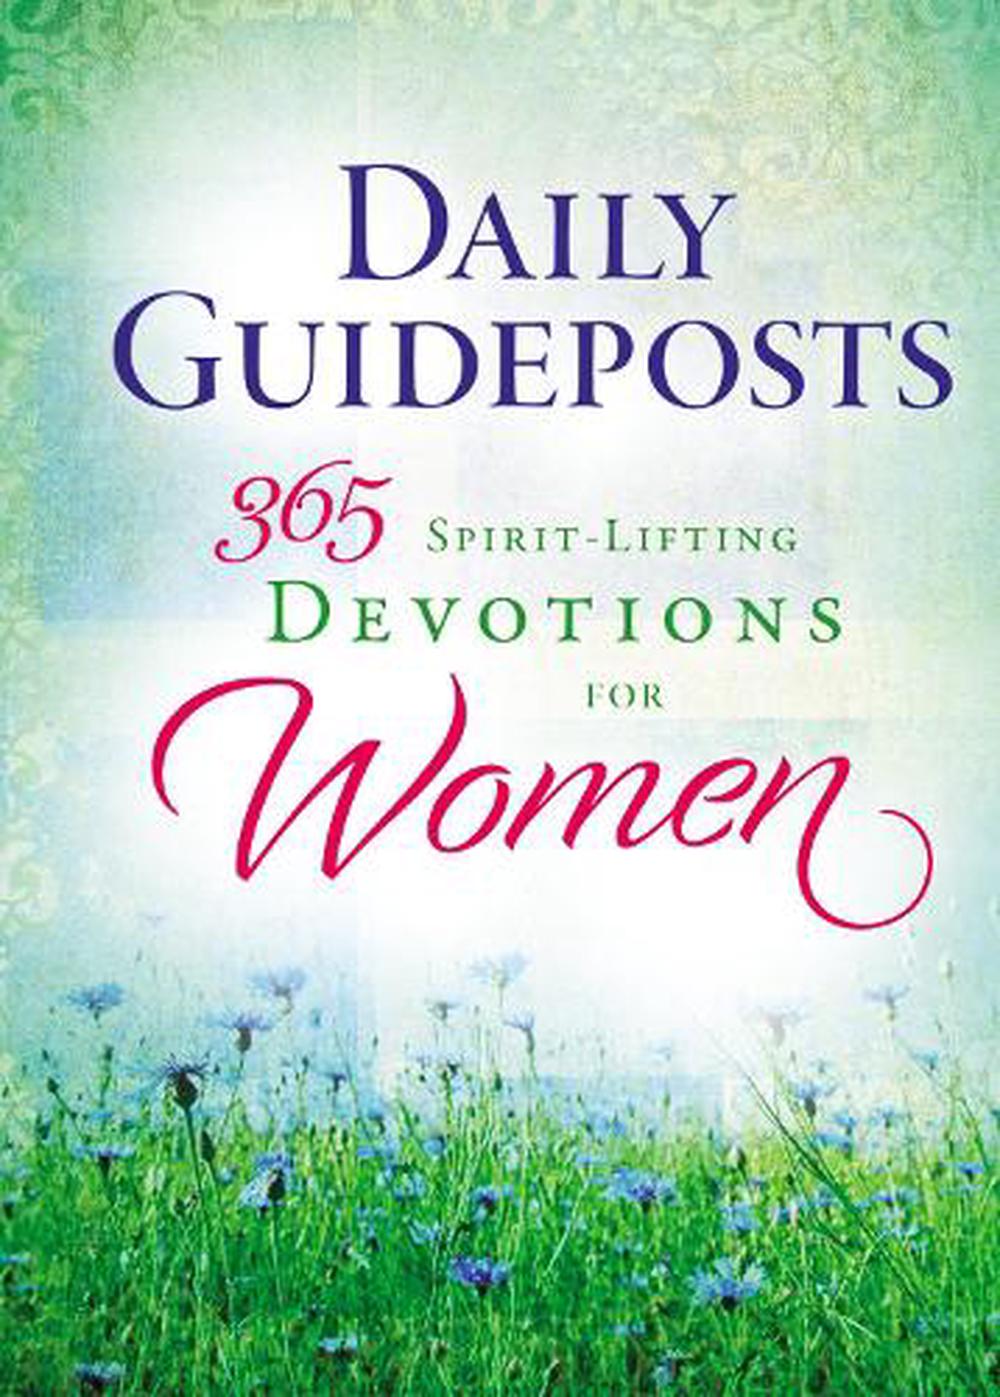 Daily Guideposts 365 Spiritlifting Devotions for Women by Guideposts